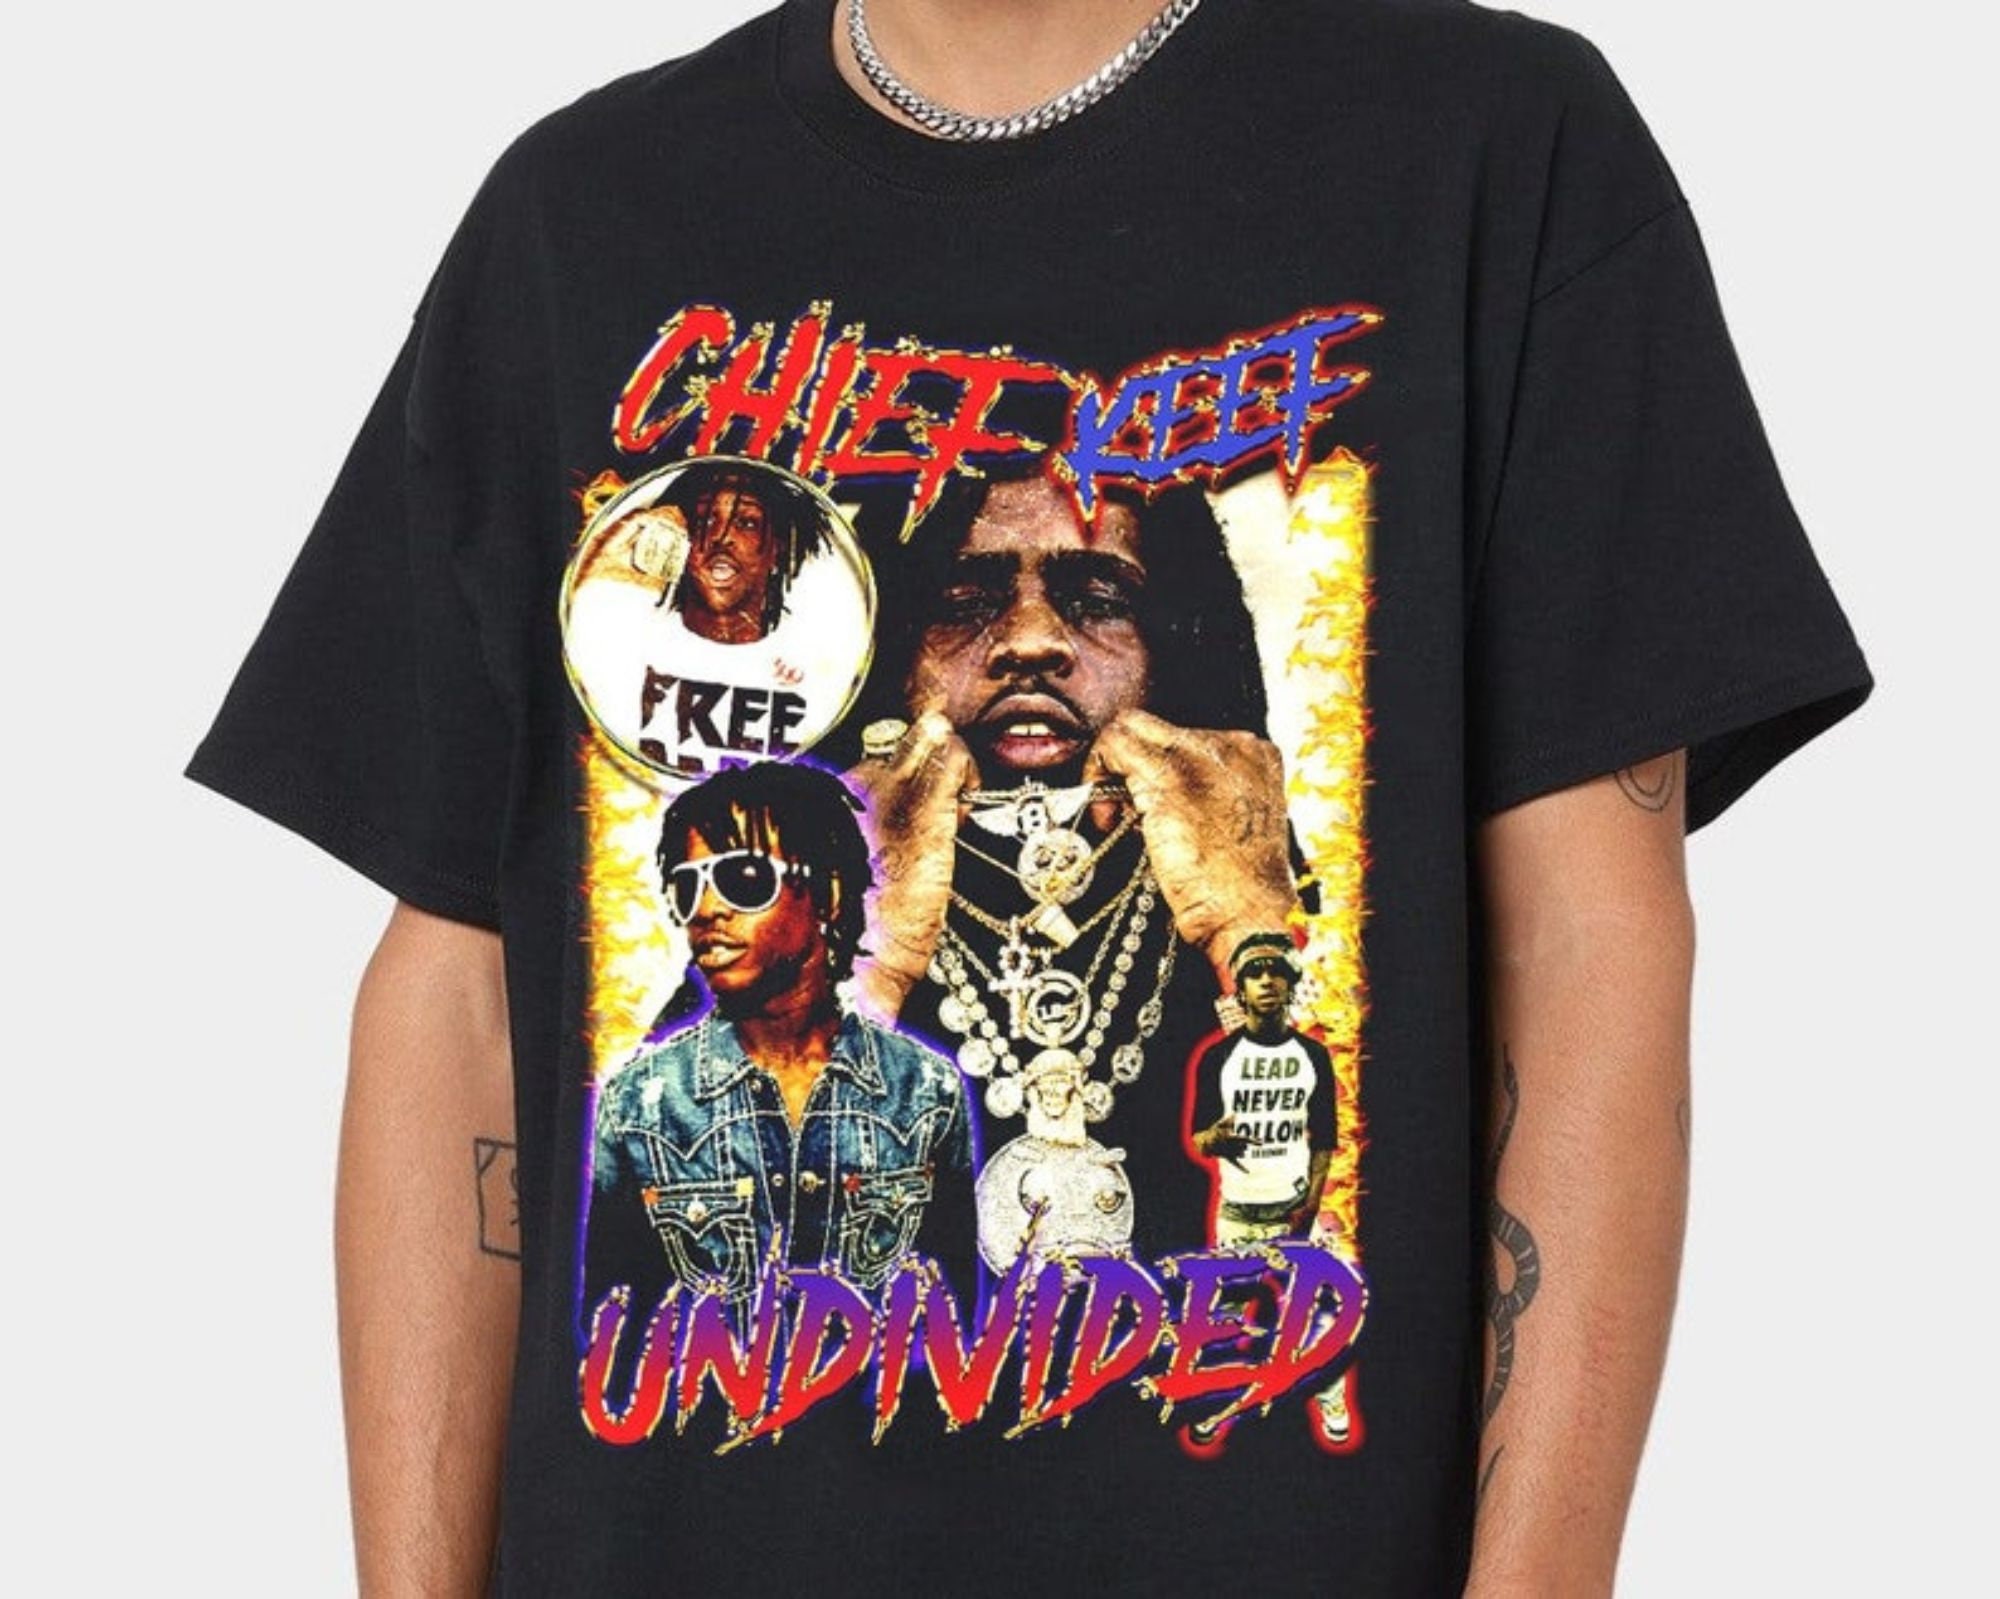 Discover chief keef rap tee vintage rap t shirt